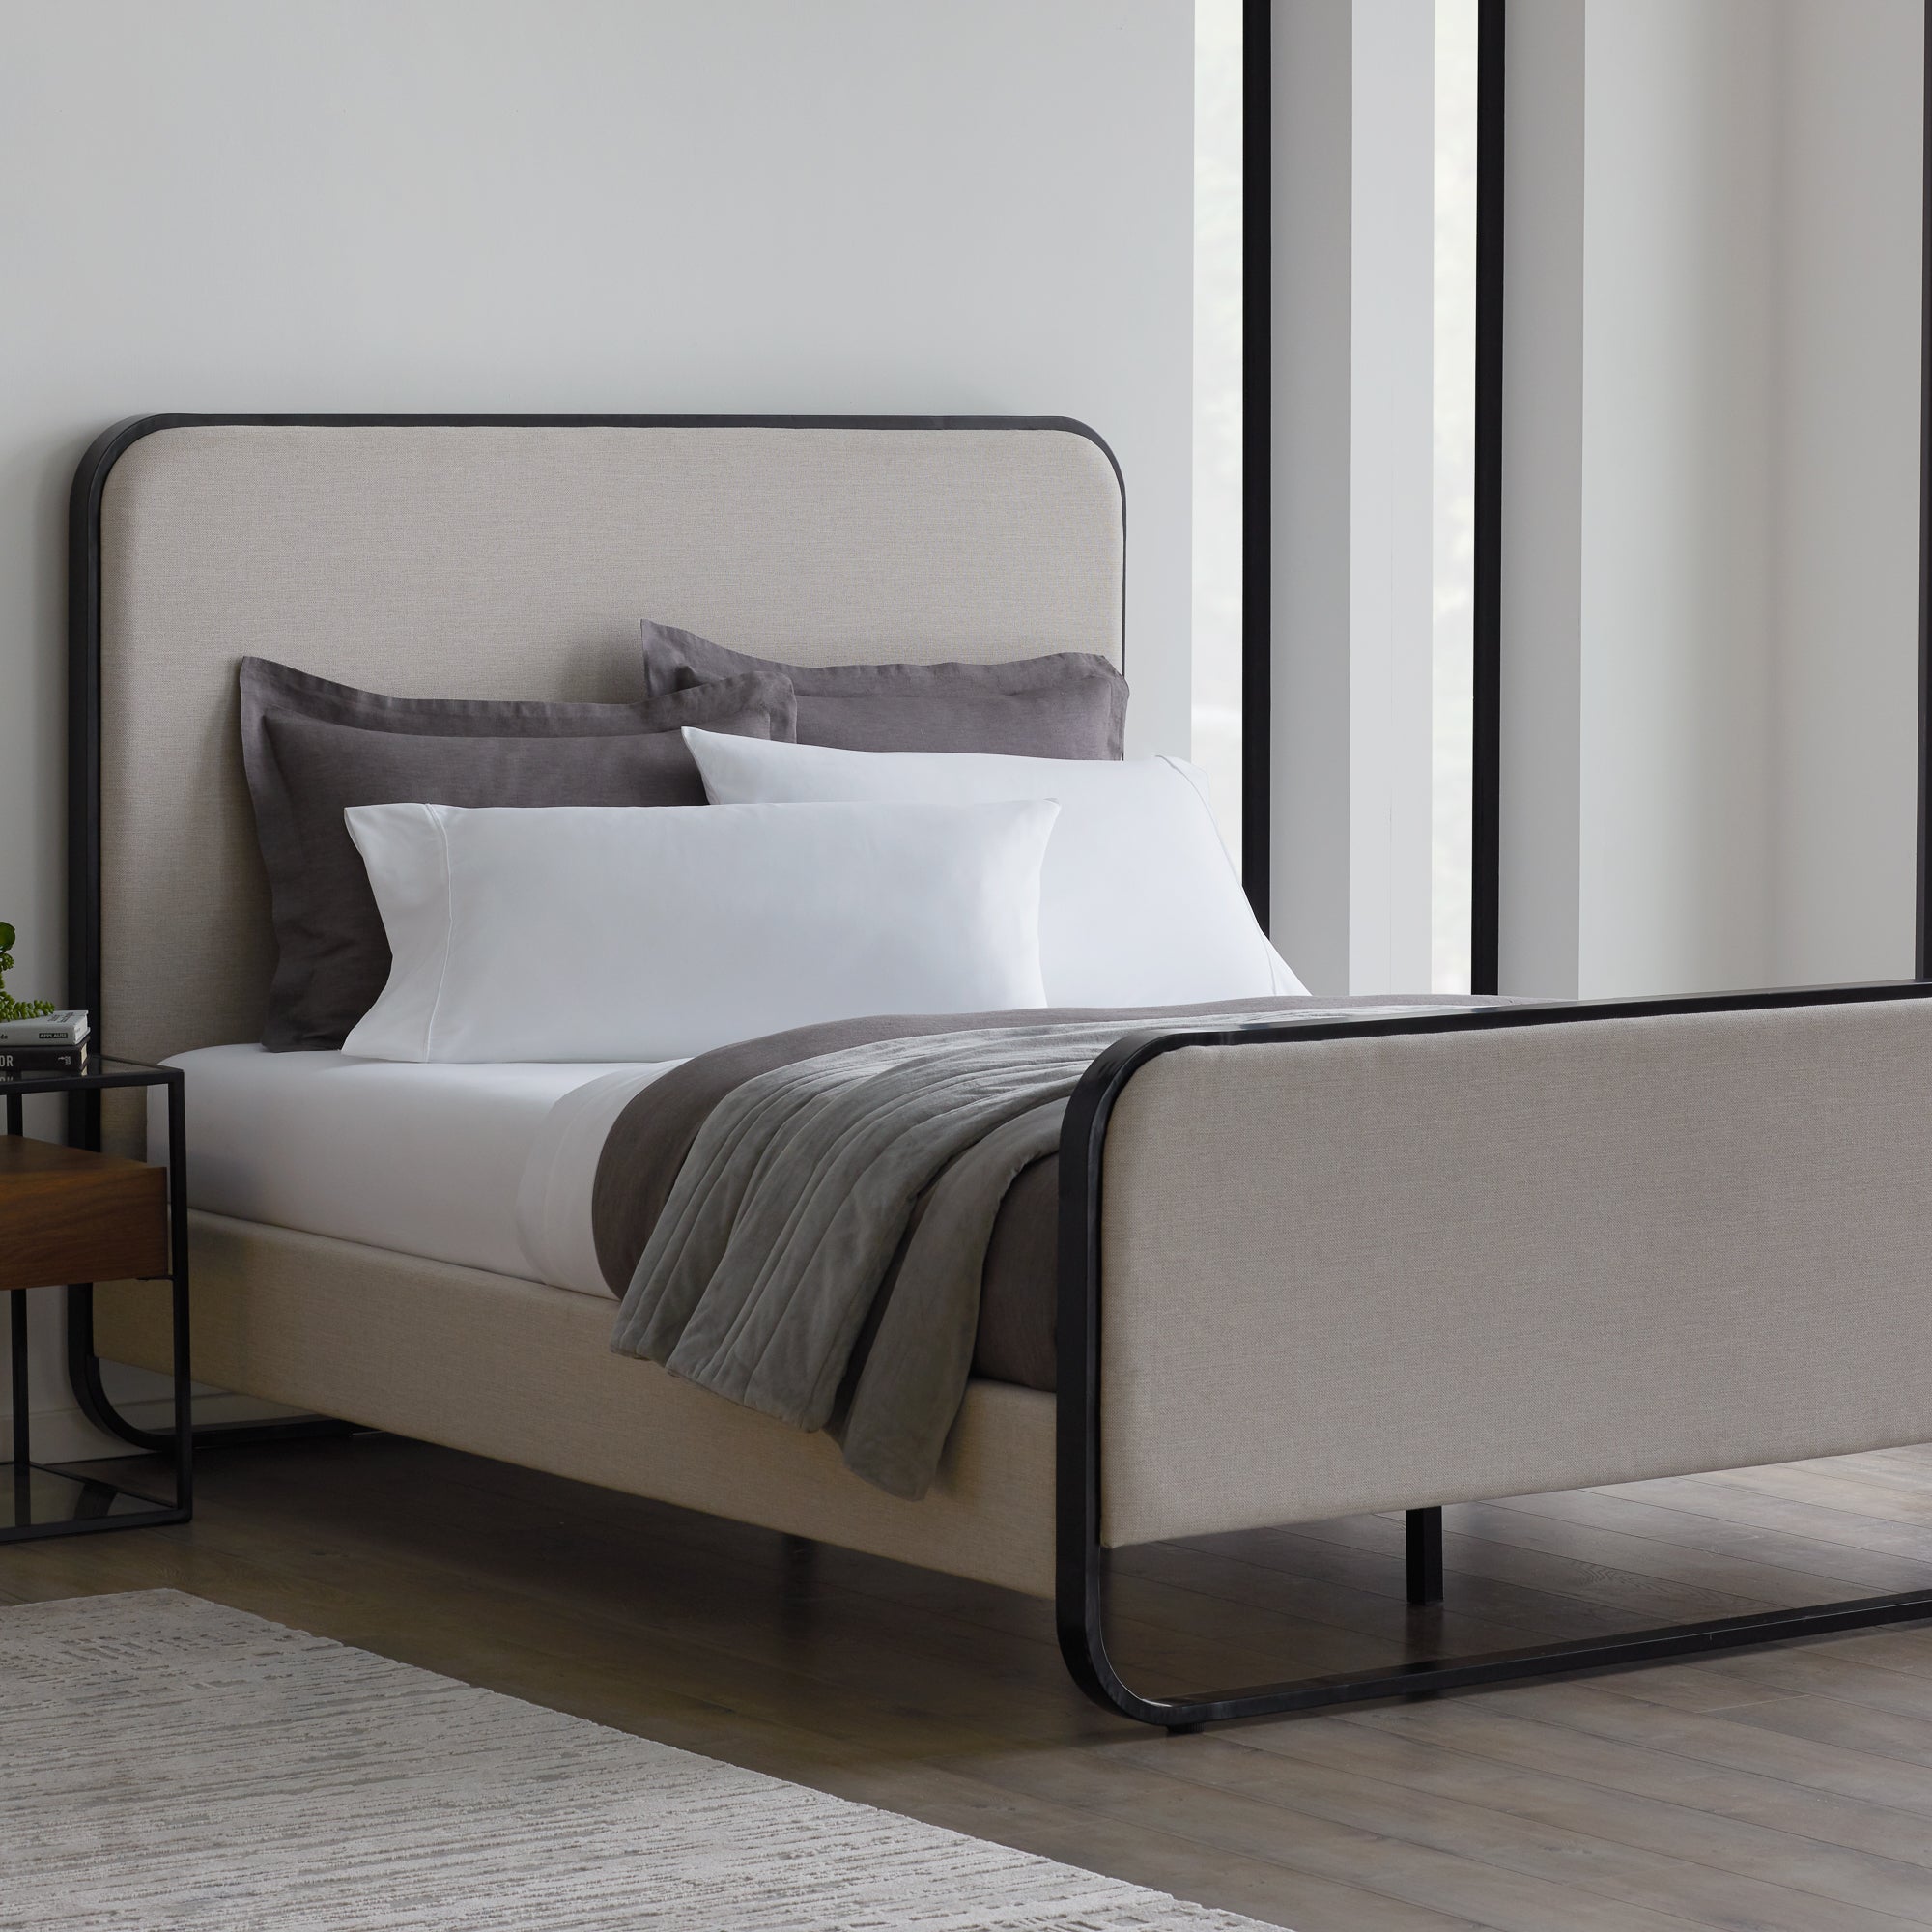 MAKE A STATEMENT WITH MALOUF DESIGNER BEDS - HYGGE CAVE